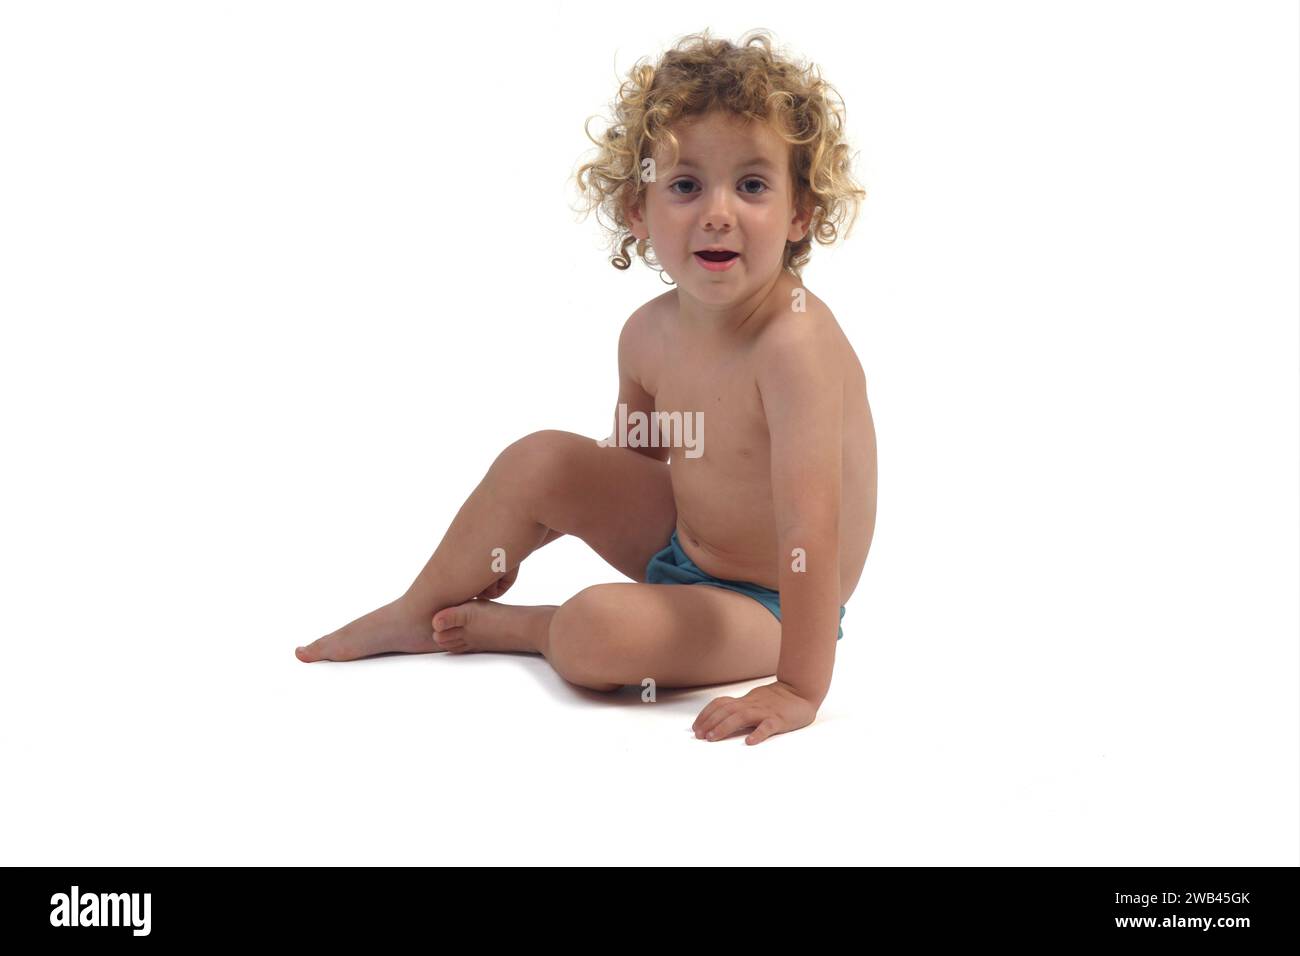 baby boy sitting on the floor looking at camera on white background Stock Photo